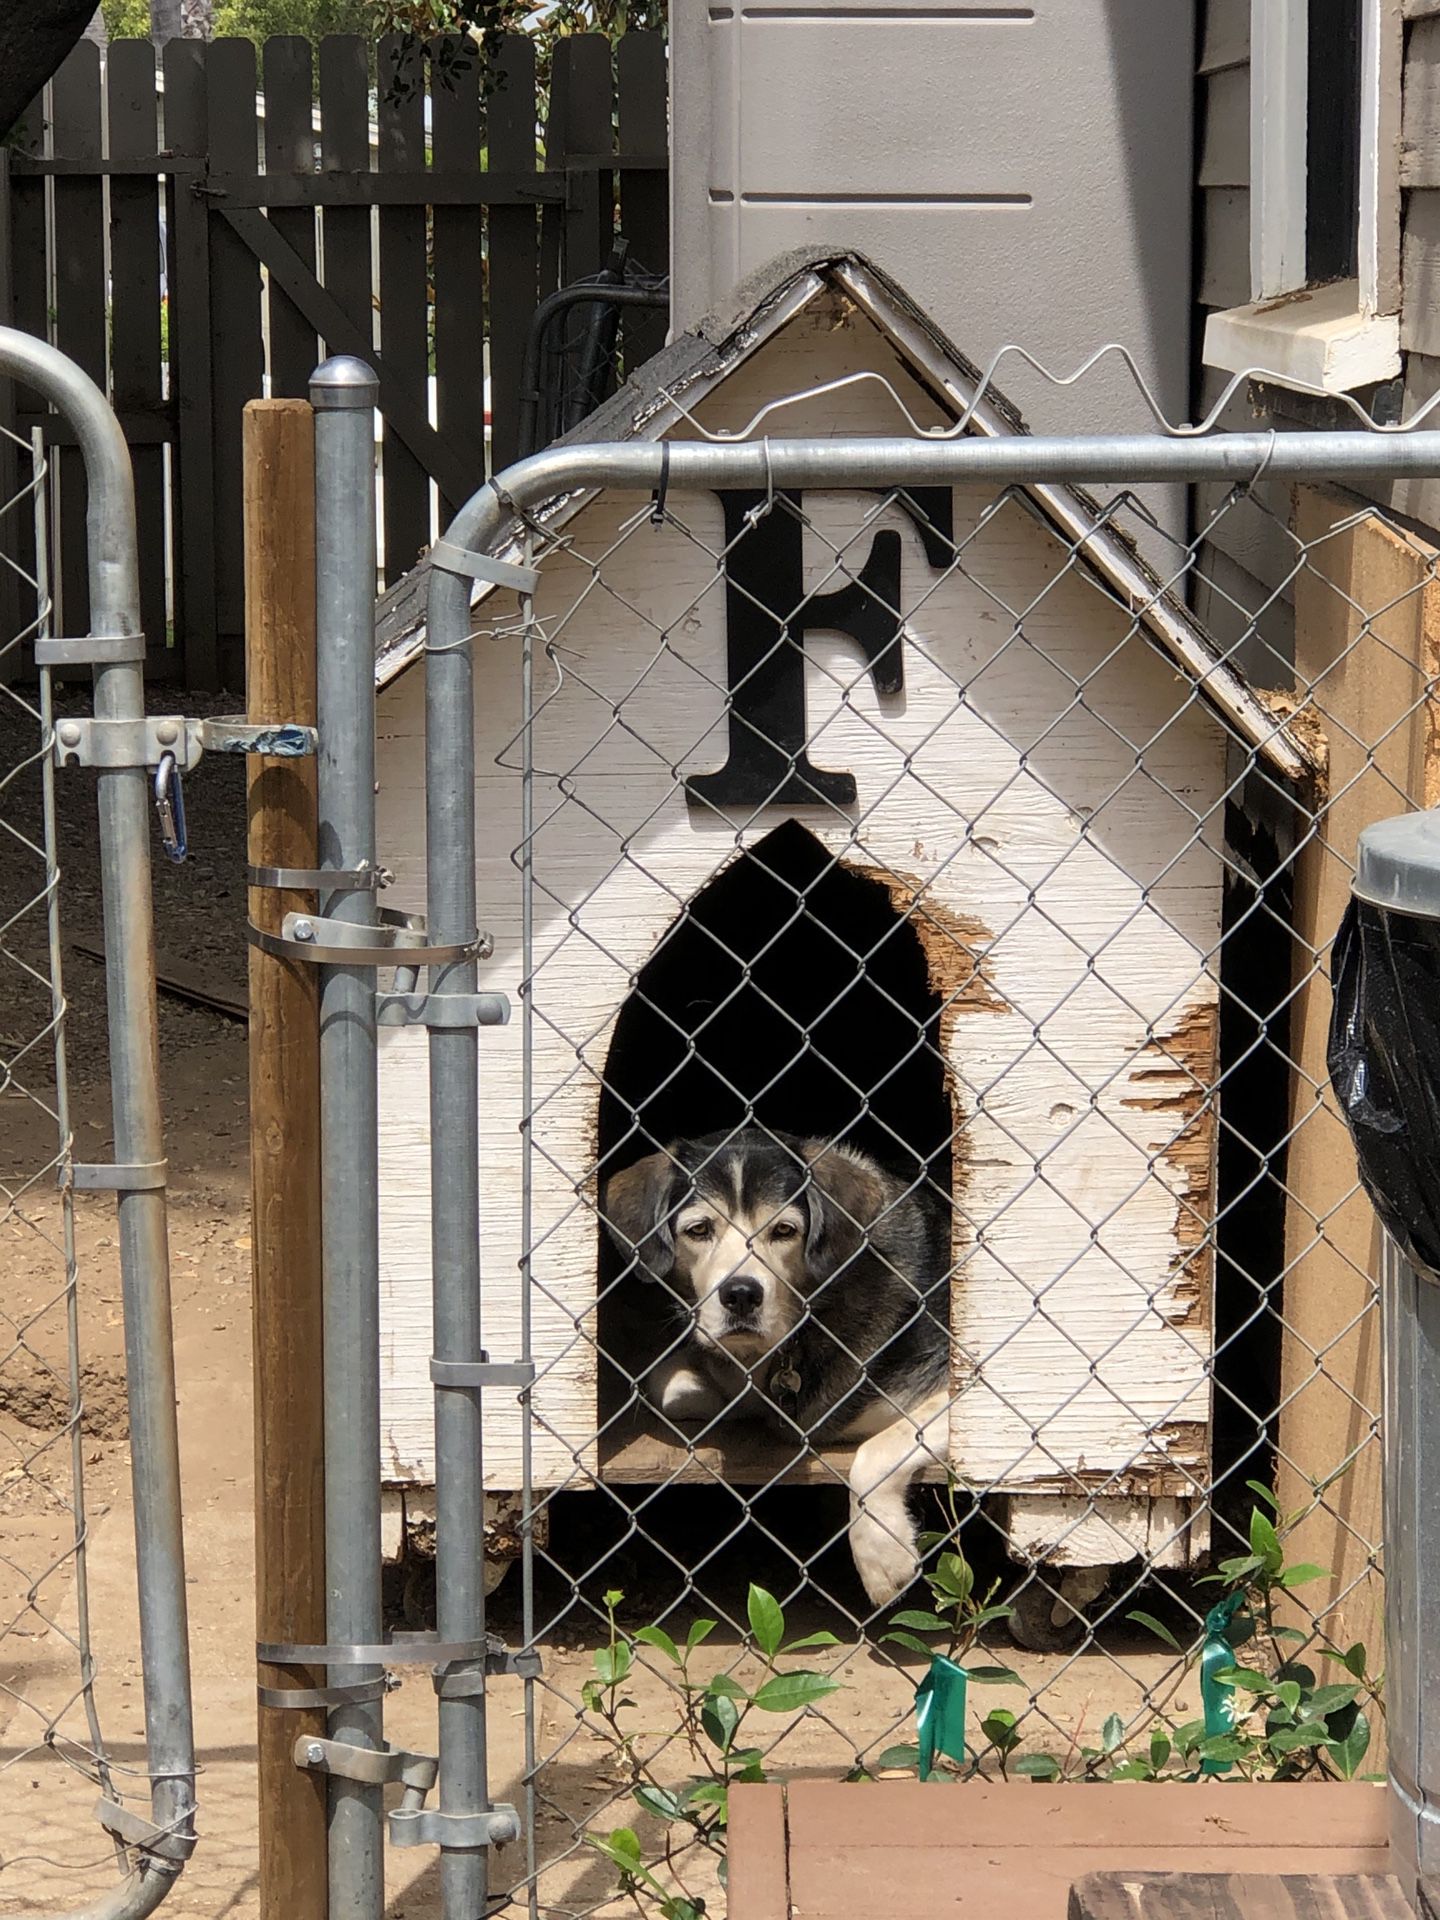 Dog House (dog not included)